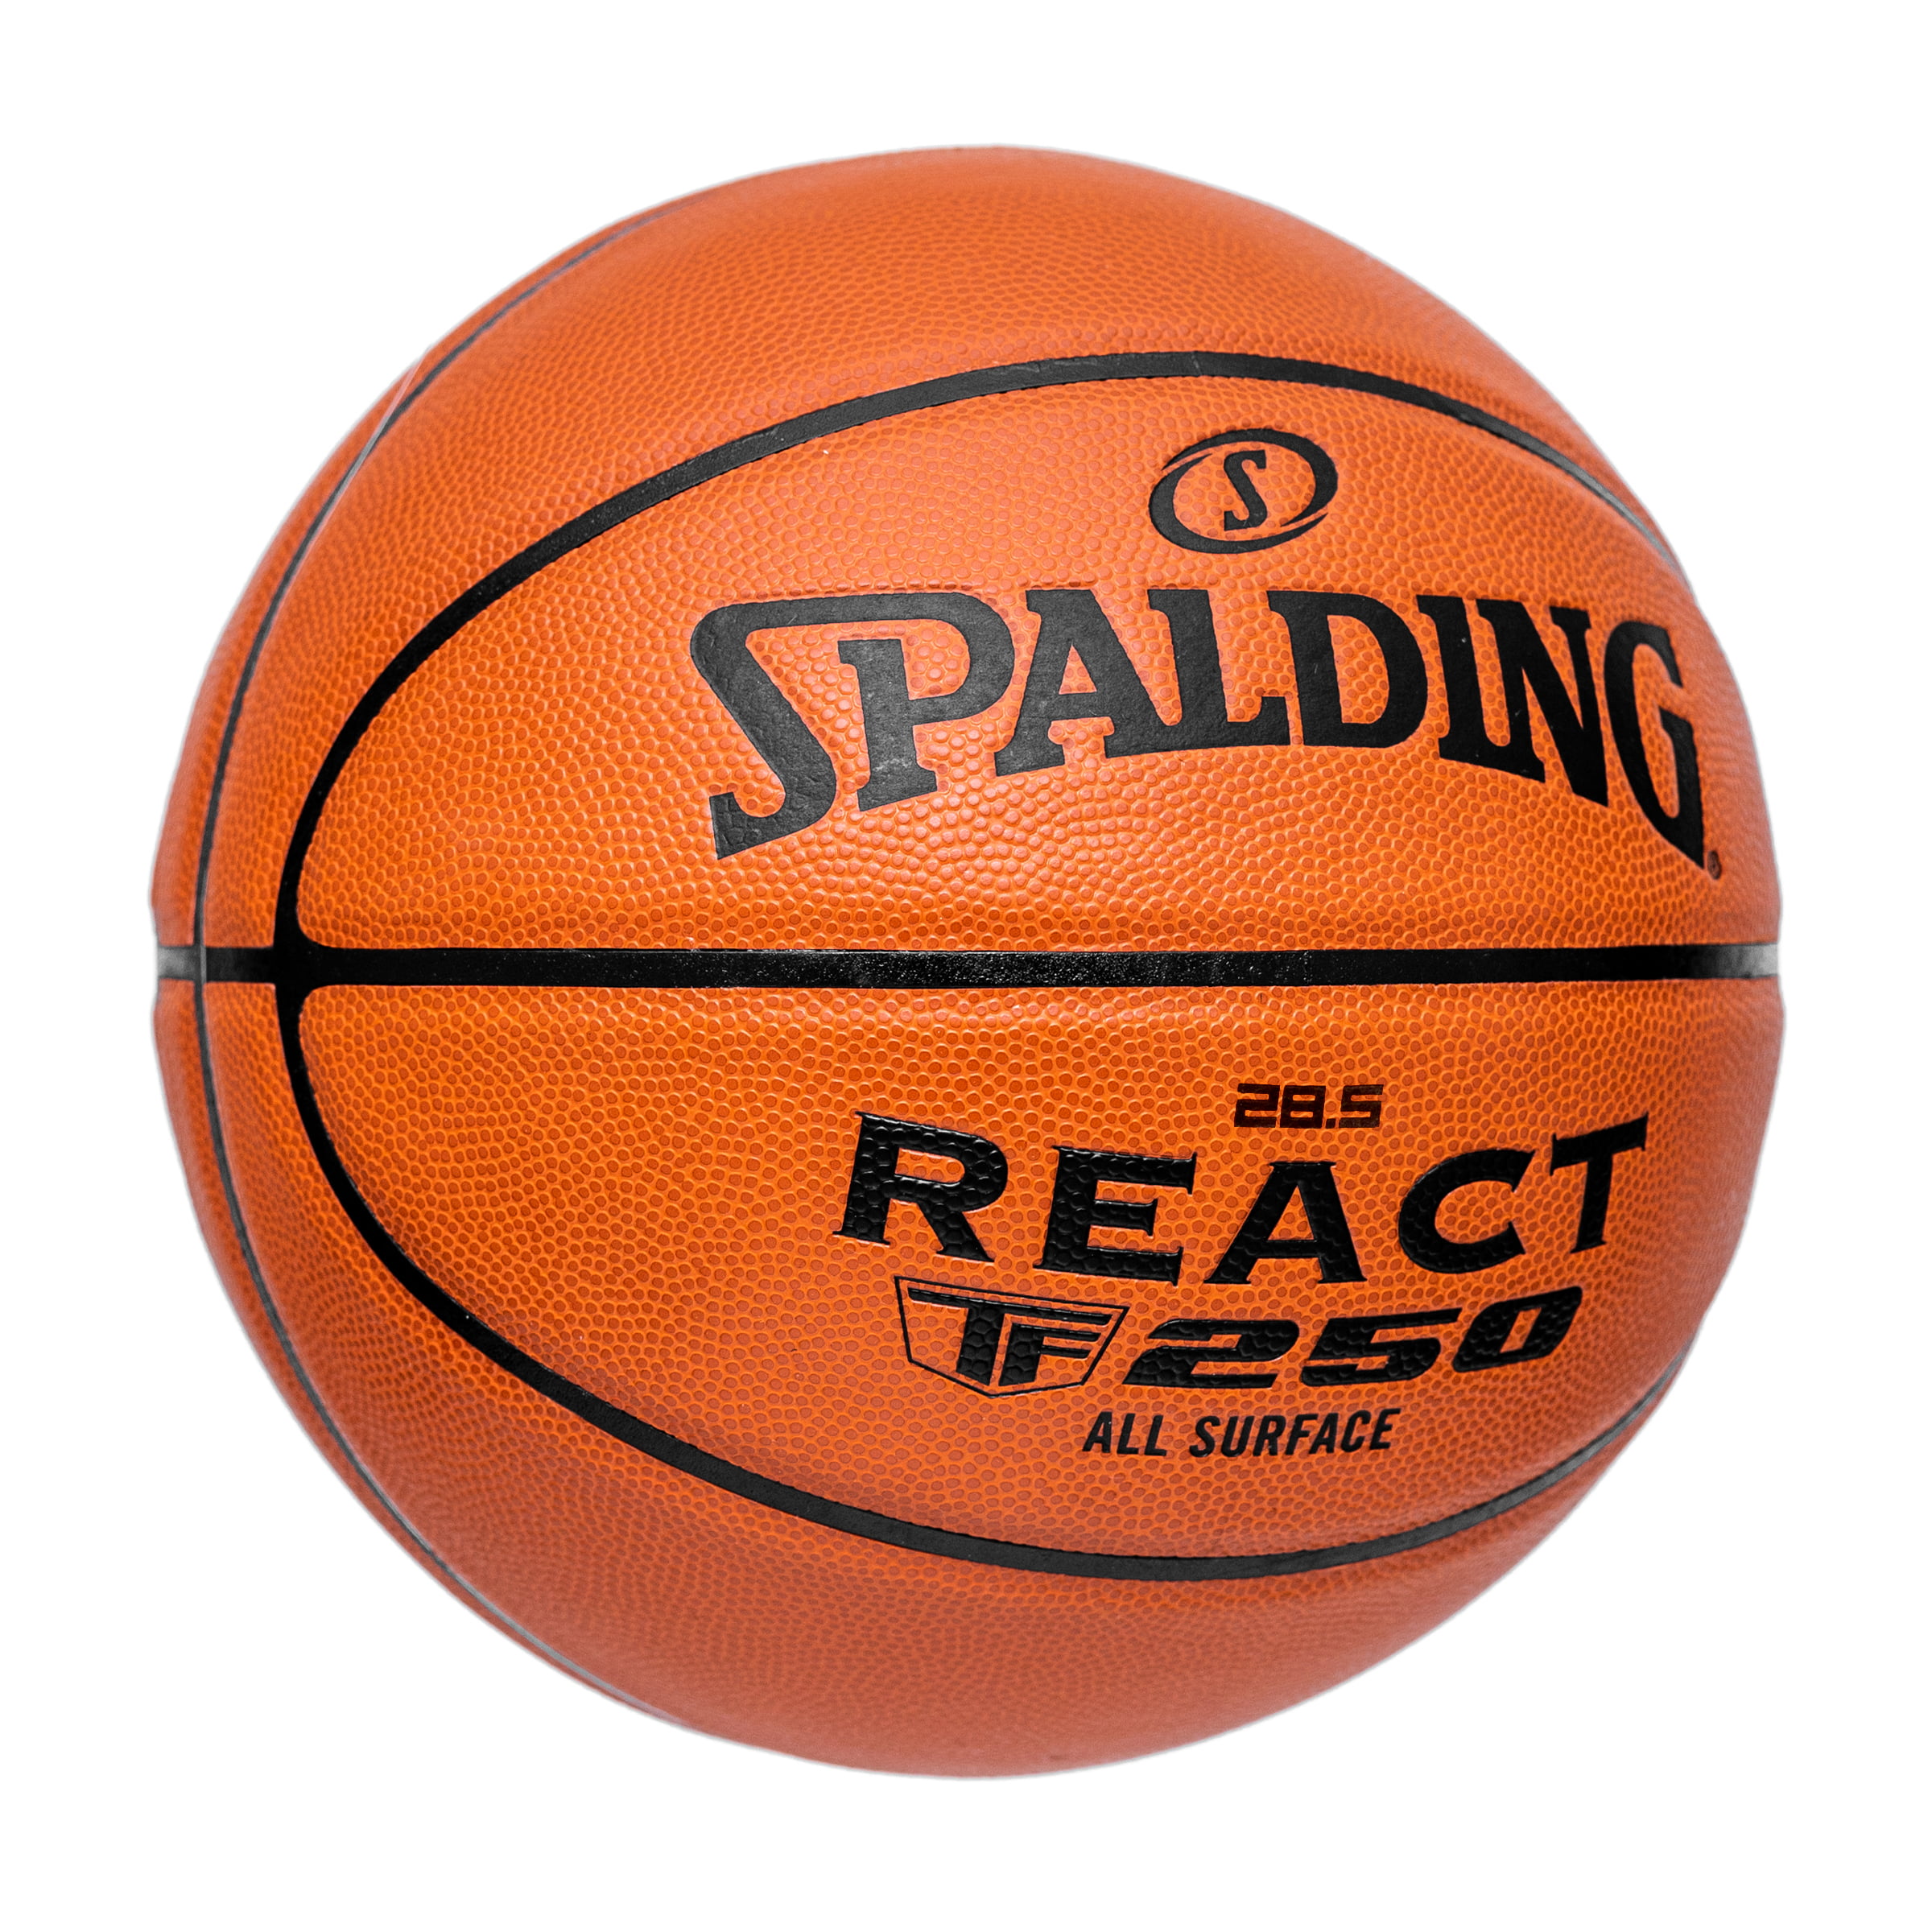 SPALDING Youth TF250 27.5 Indoor/Outdoor Basketball All Surface Composite 